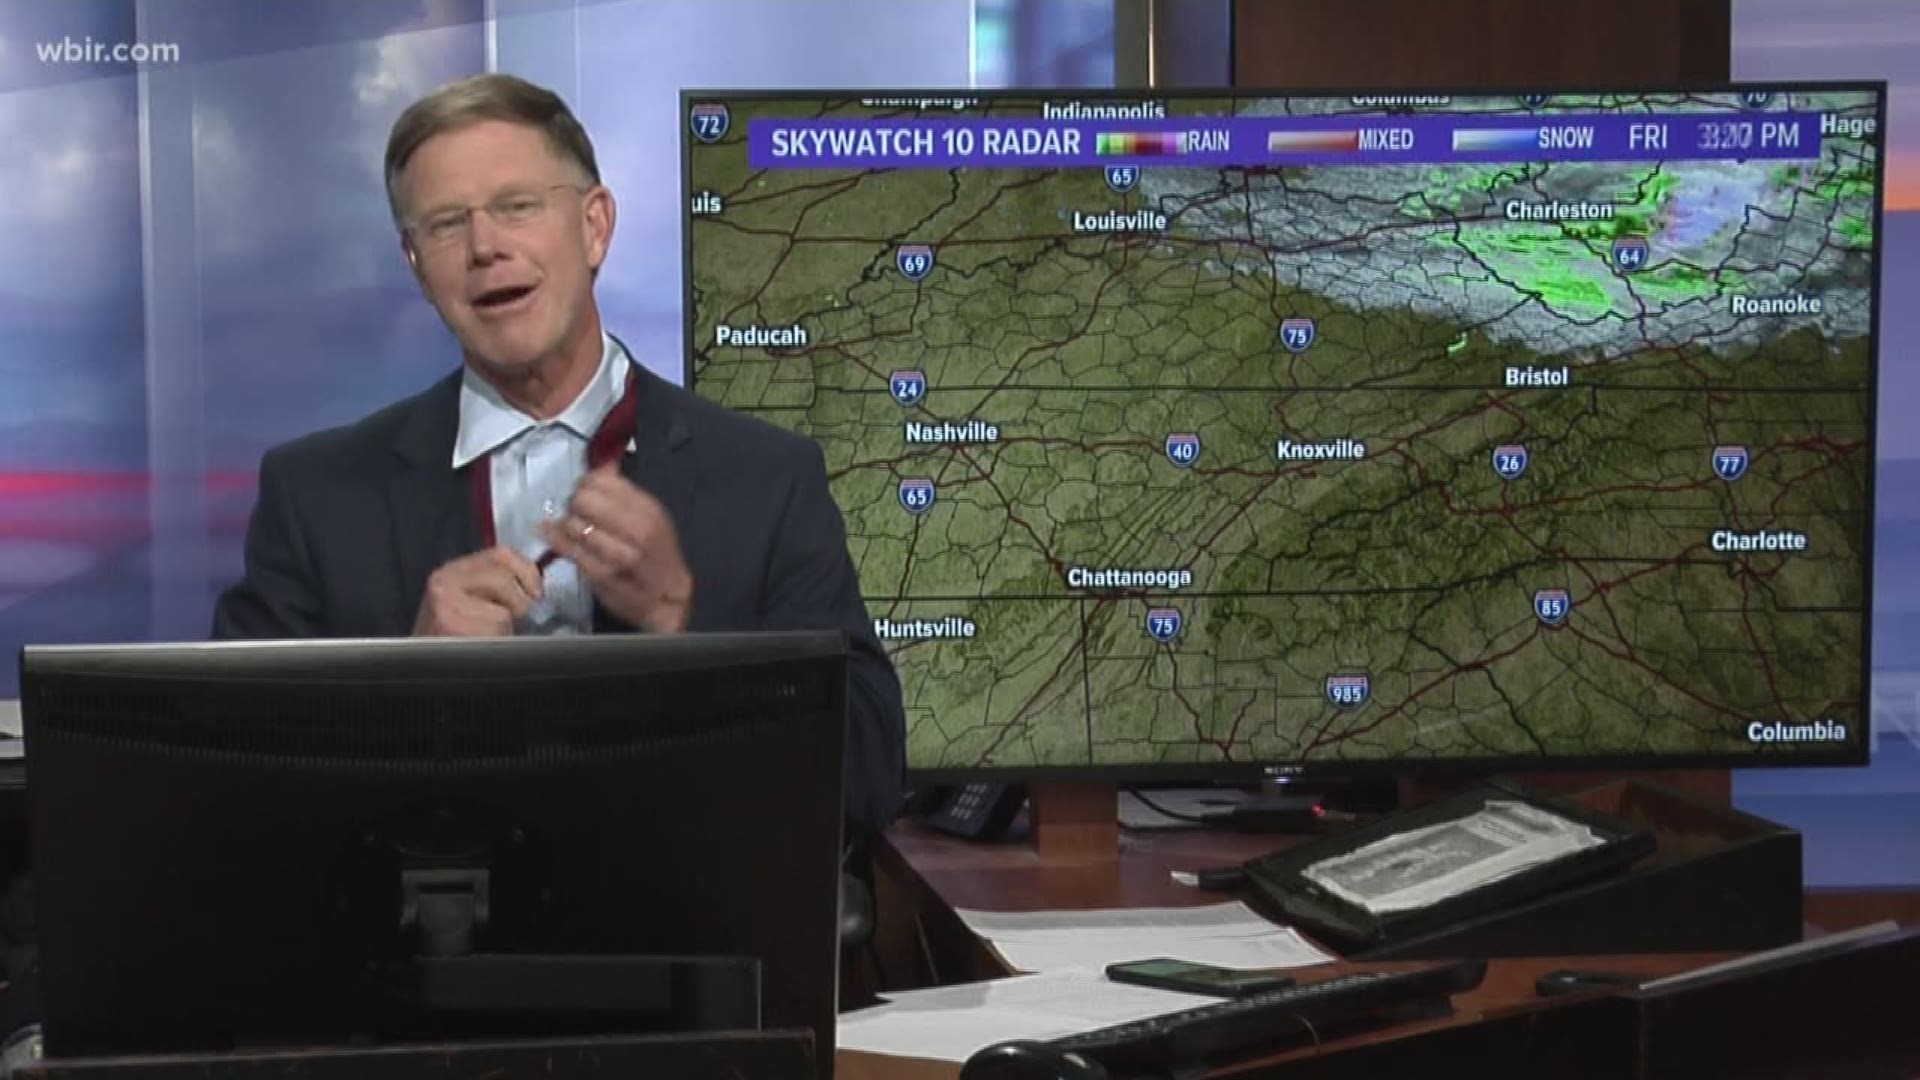 Chief Meteorologist Todd Howell didn't realize the tie he wore to work Friday was the color of Tennessee's rival in game one of the NCAA Tournament so he just took care of that the moment he realized it -- despite being live on TV.